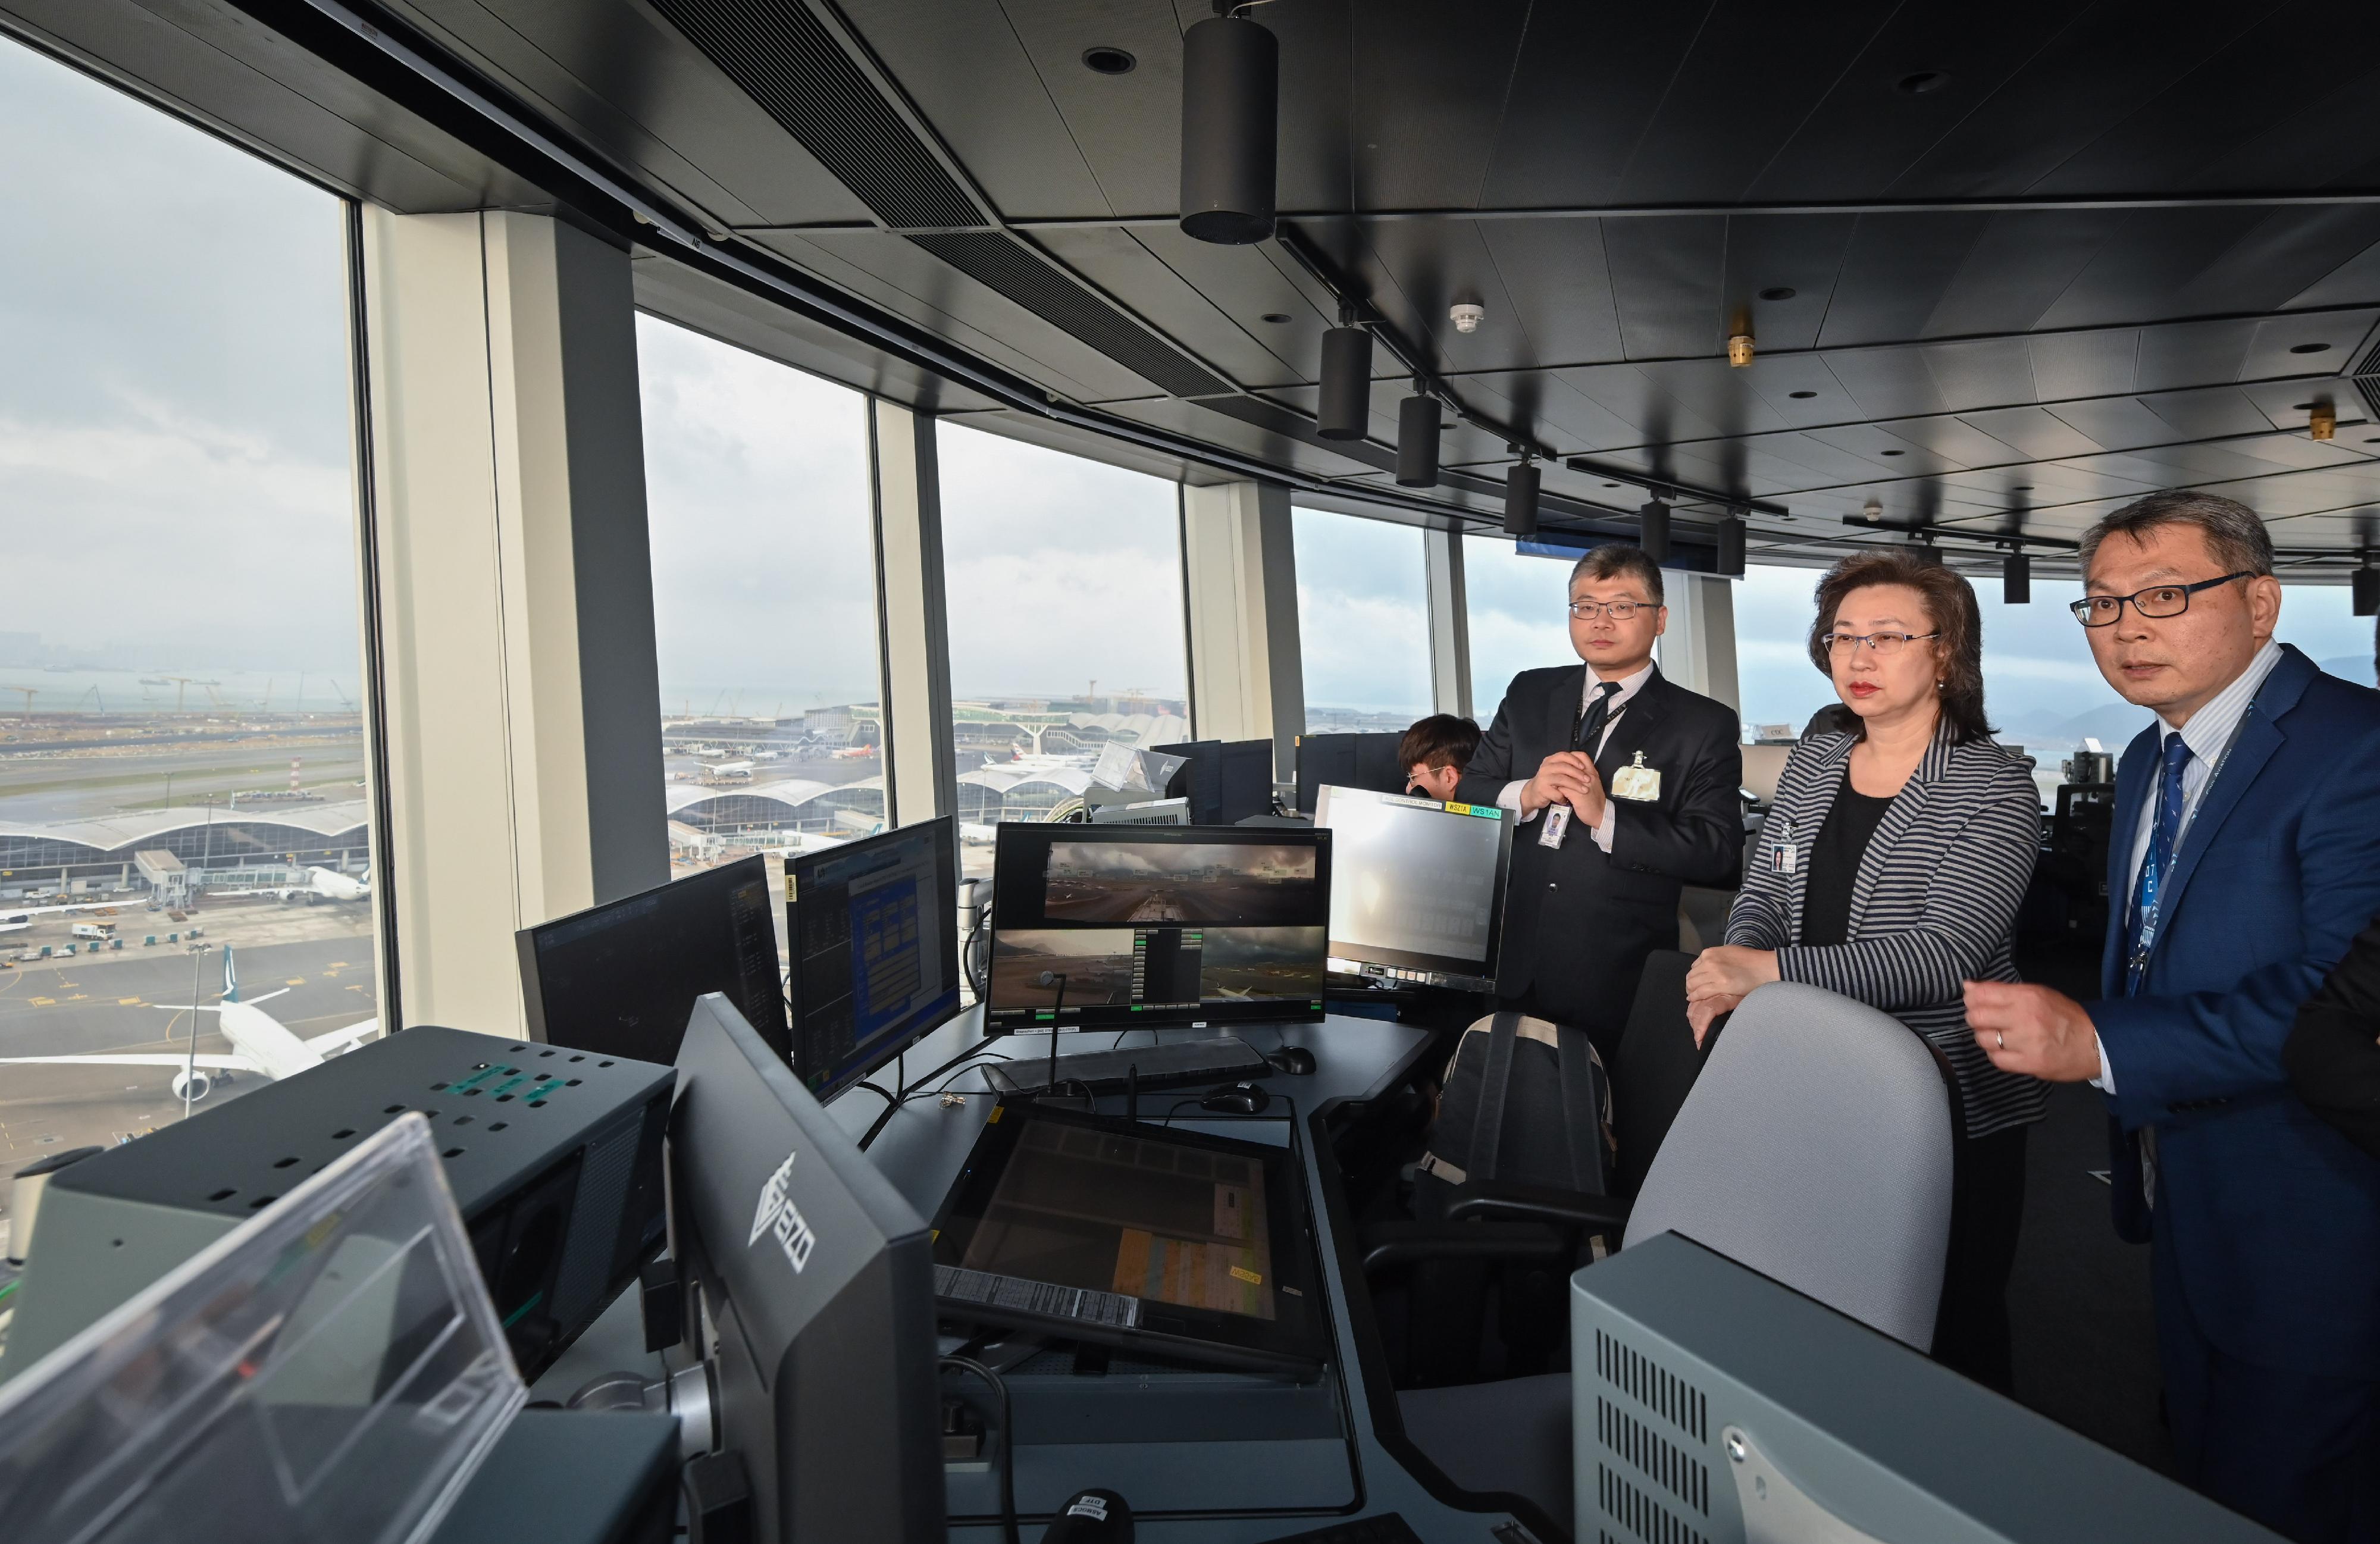 The Secretary for the Civil Service, Mrs Ingrid Yeung, visited the Civil Aviation Department Headquarters today (April 4) to get an update on its latest developments and listen to the views of its staff. Photo shows Mrs Yeung (centre) being briefed by the Director-General of Civil Aviation, Mr Victor Liu (right), in the Air Traffic Control Tower on the daily work of colleagues on duty. Looking on is the Assistant Director-General of Civil Aviation (Air Traffic Engineering Services), Mr Hui Man-ho (left).
